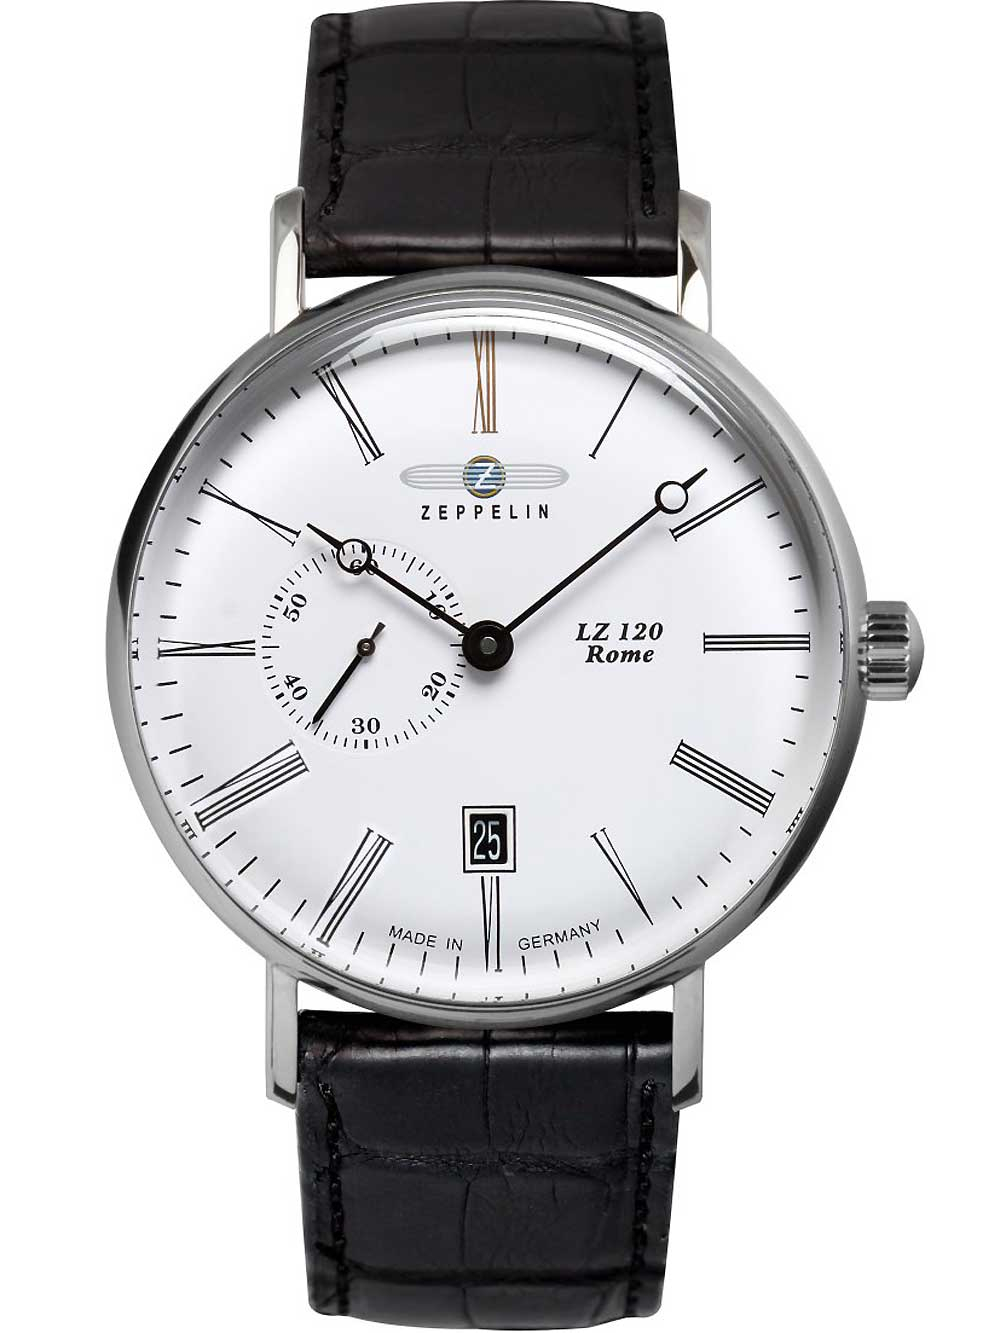 Zeppelin 7104-1 Rome automatic small second 41mm 5ATM BY ZEPPELIN - Wristwatch available at DOYUF